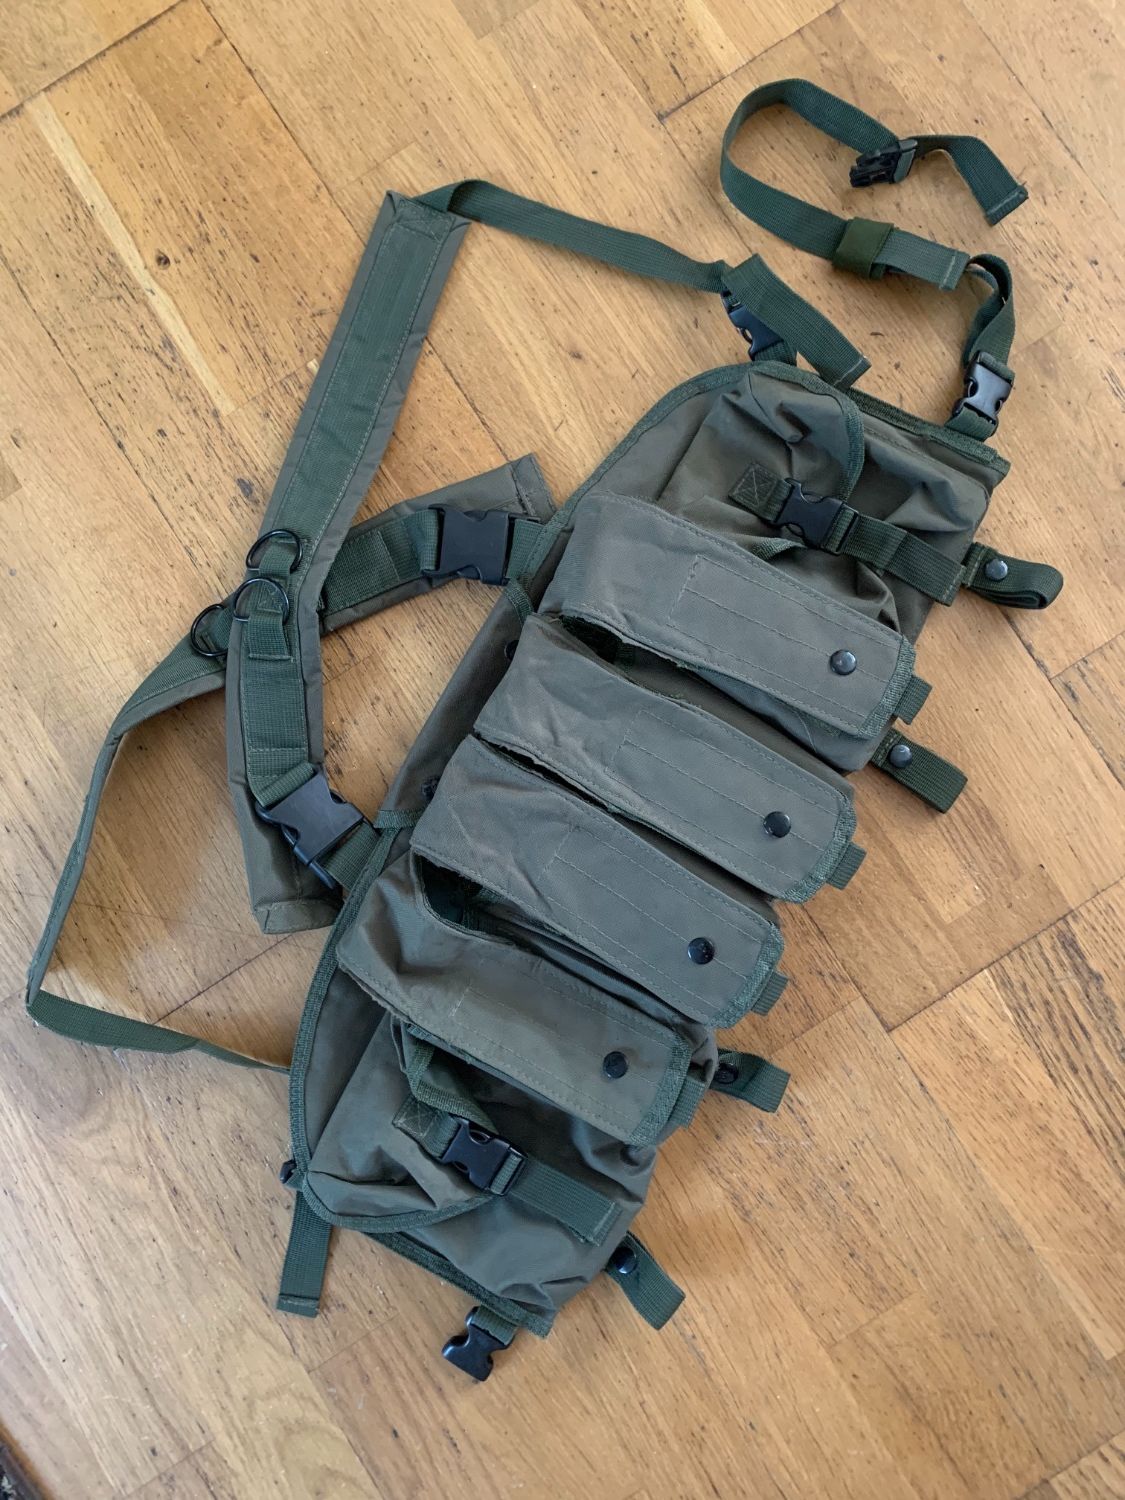 AK Chest Rig - Parts - Airsoft Forums UK